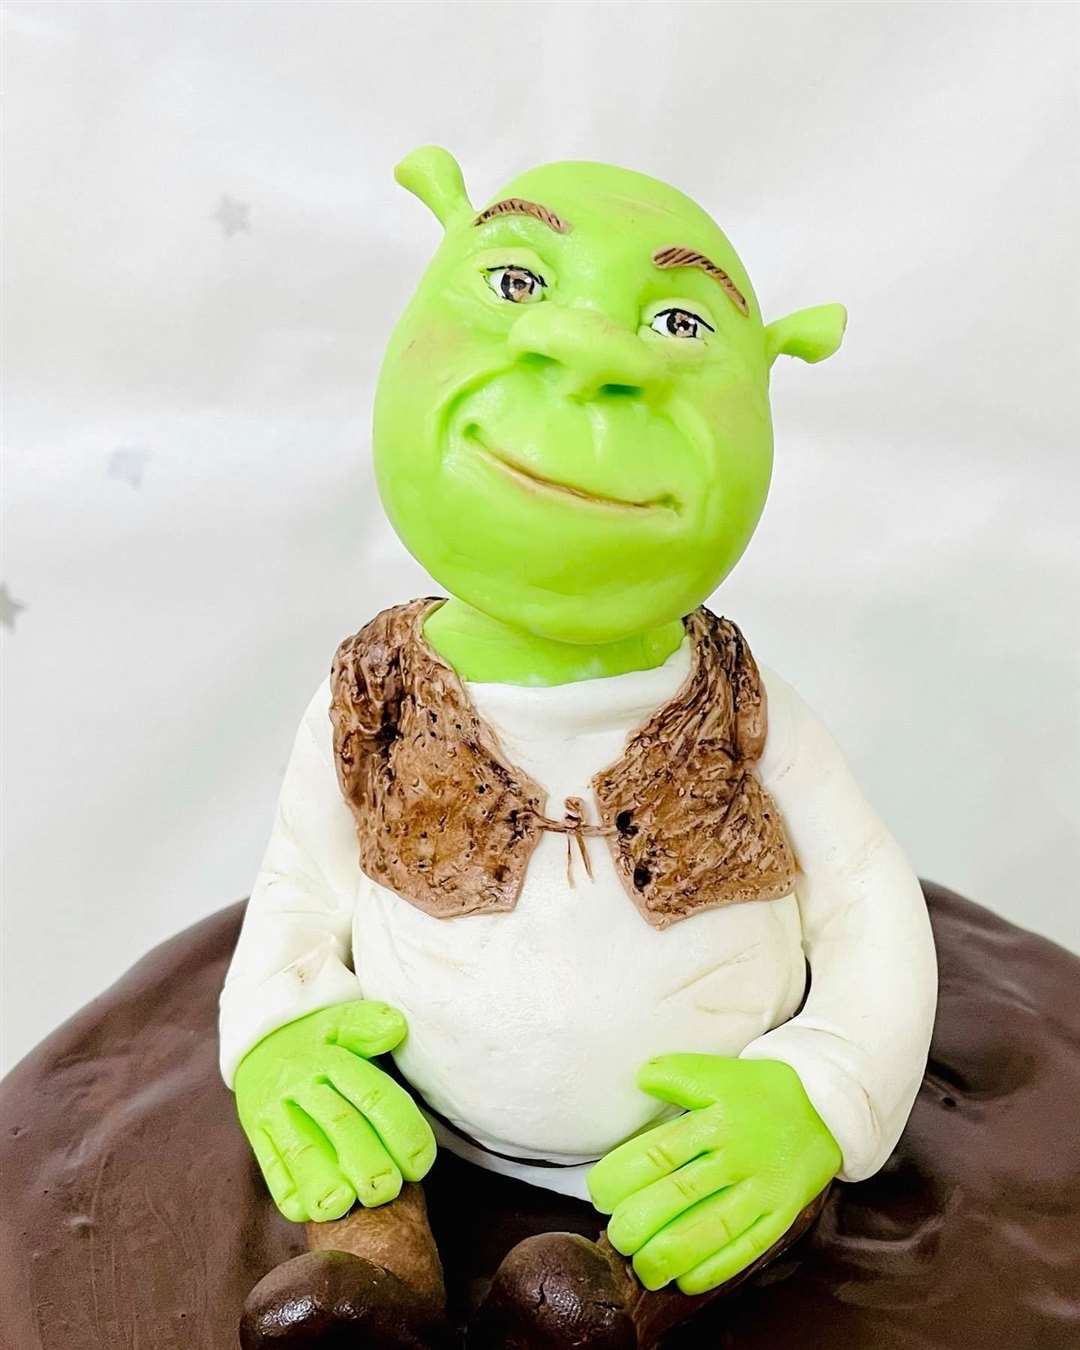 Kelly Jones, Owner of D'licious Cakes in Aylesford, Animated Character Cake, Shrek (55294554)